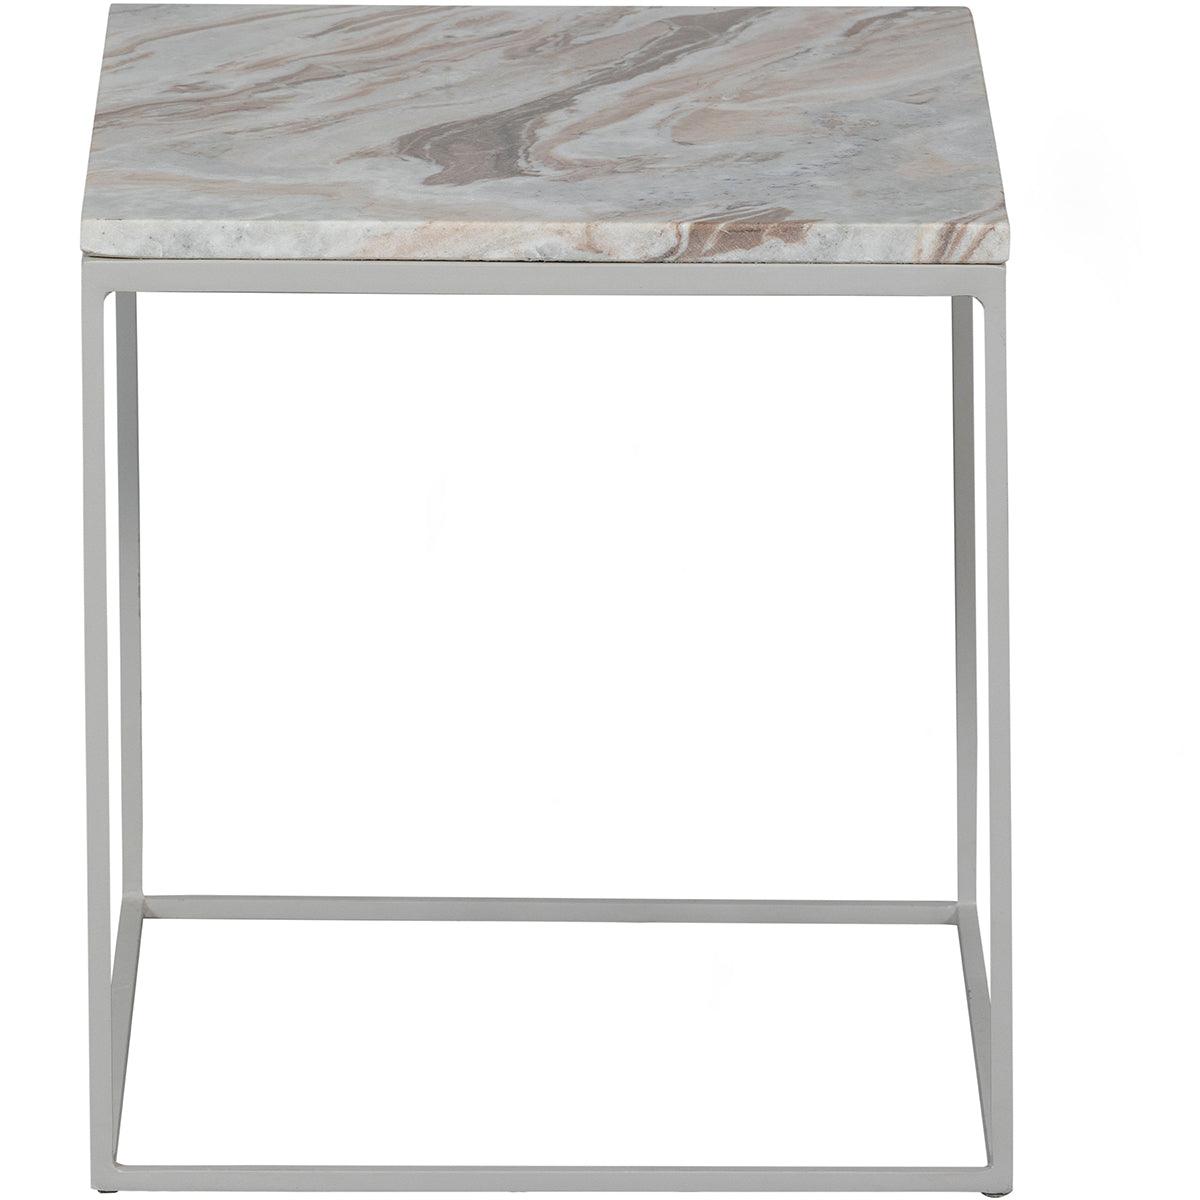 Mellow Mist Marble Coffee Table - WOO .Design